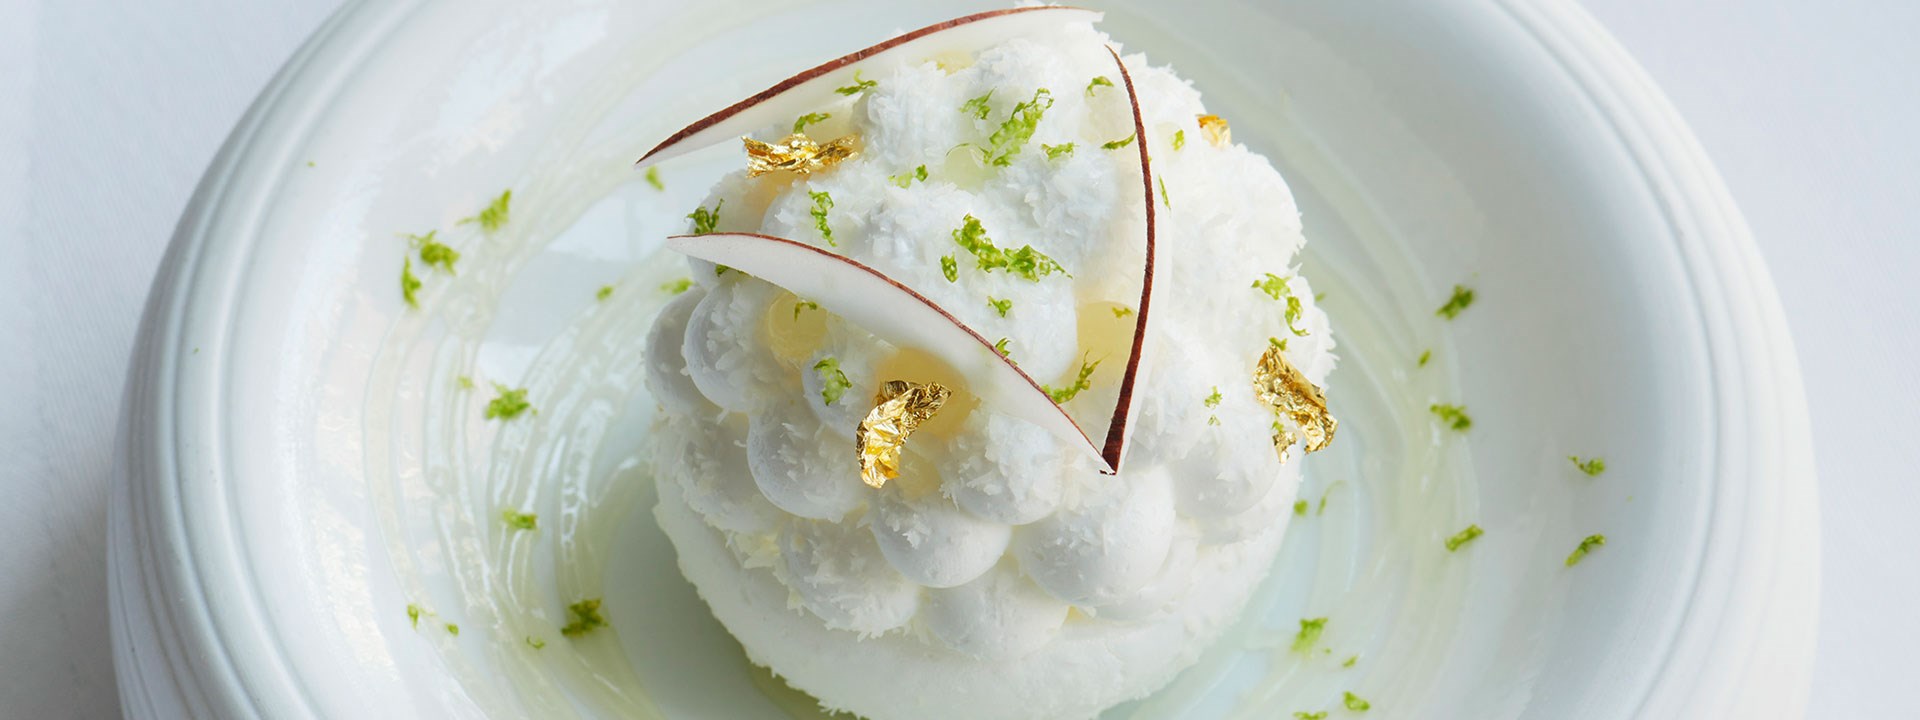 white dessert with gold fleck and green sprinkles